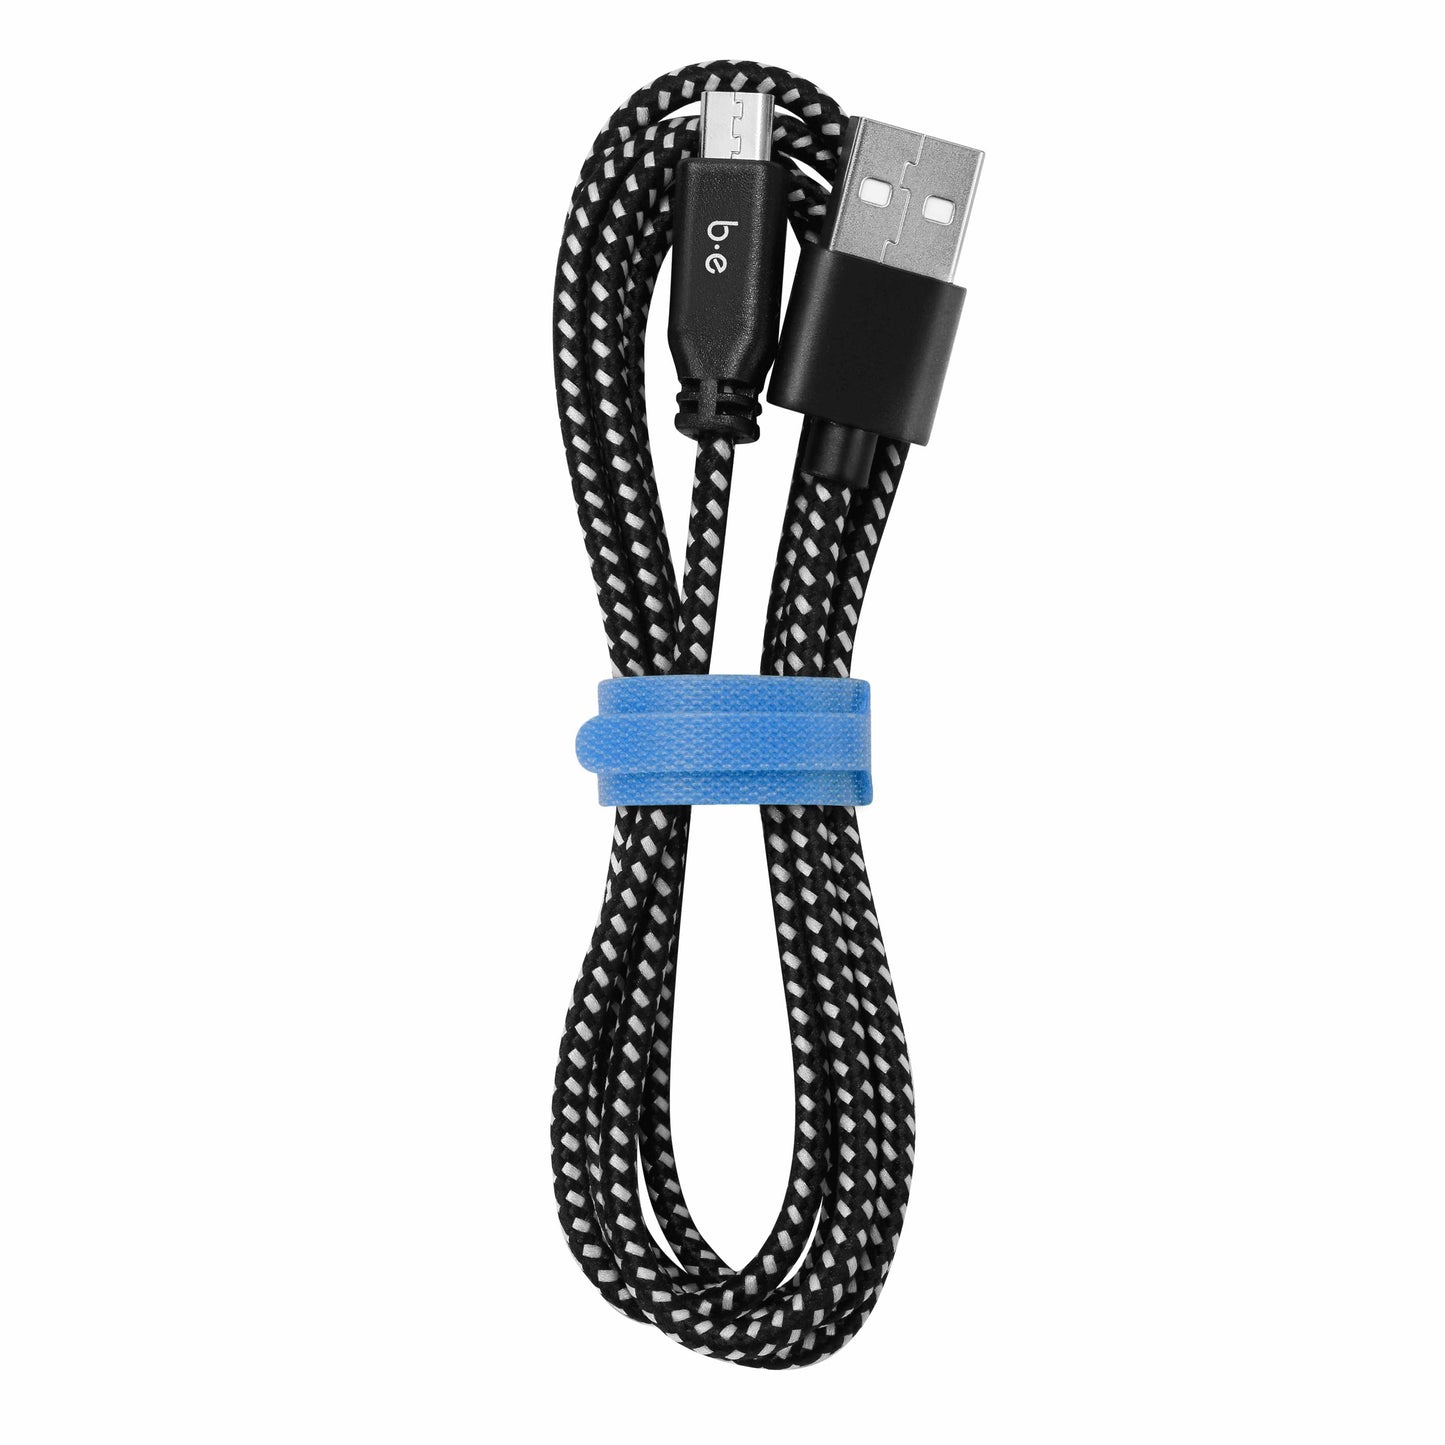 Braided Charge/Sync Micro USB Cable 6ft Zebra